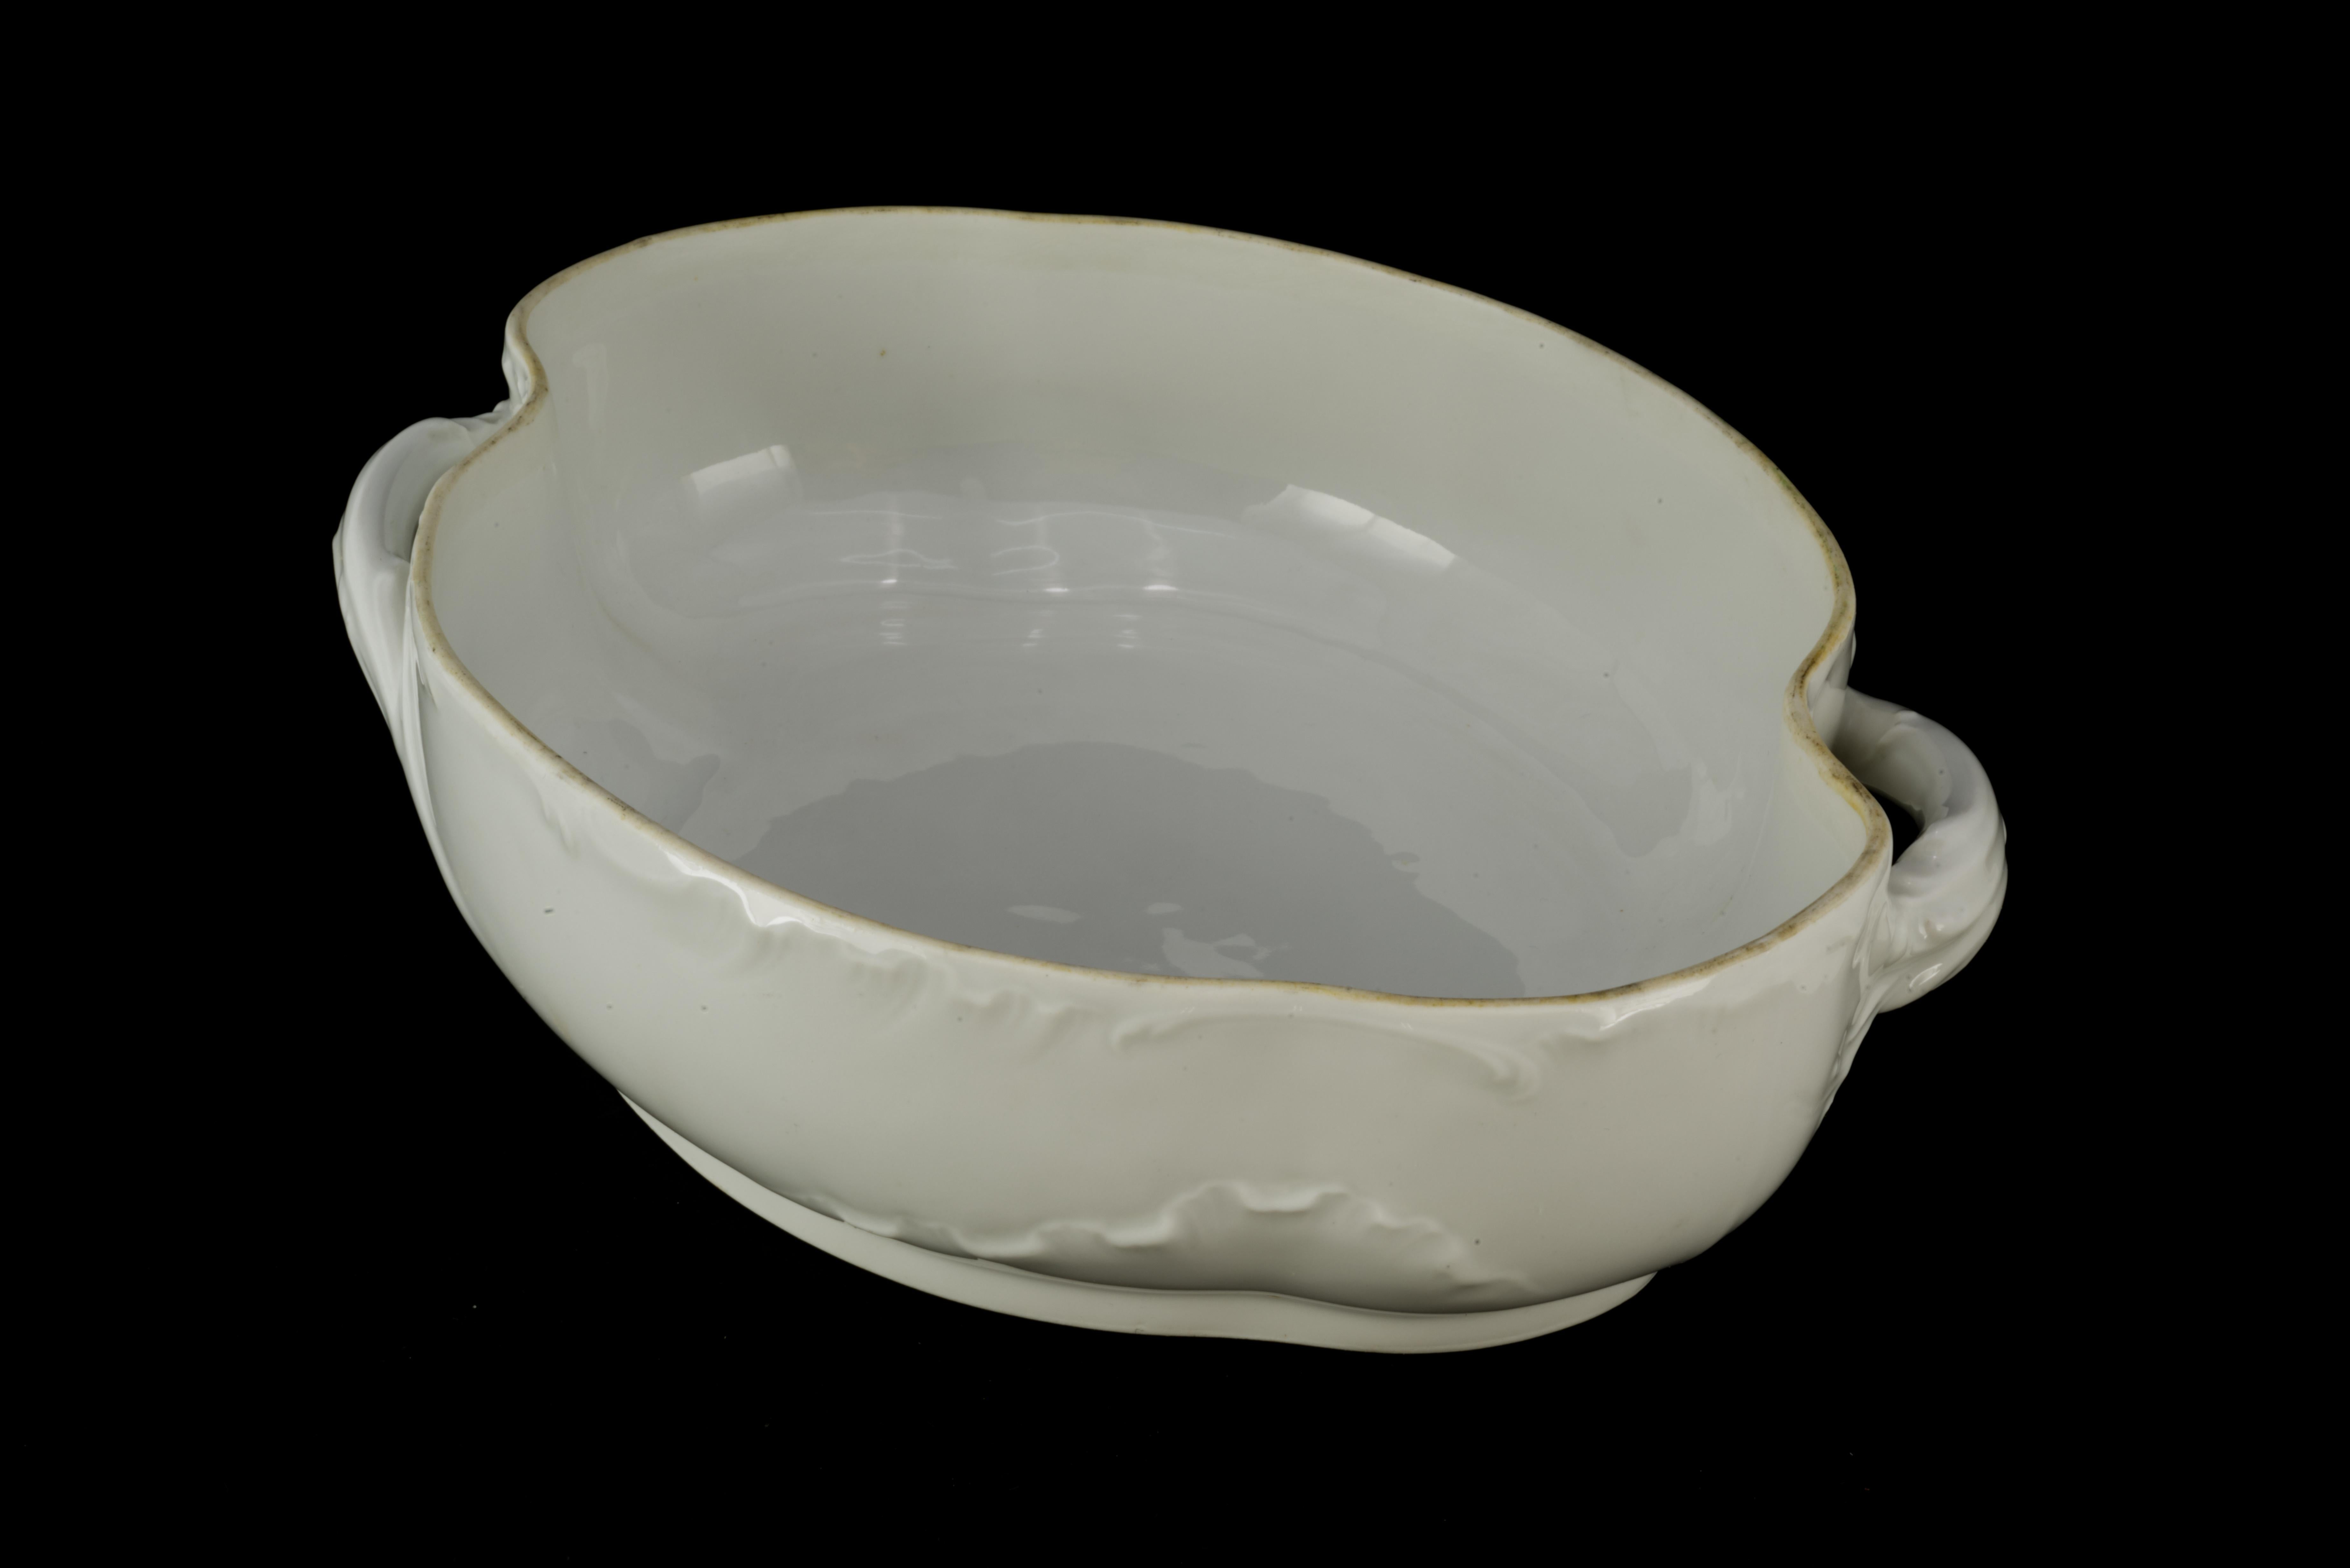 Haviland Limoges Oval Marseille Bowl with Cover, White Porcelain, 1894-1931 For Sale 4